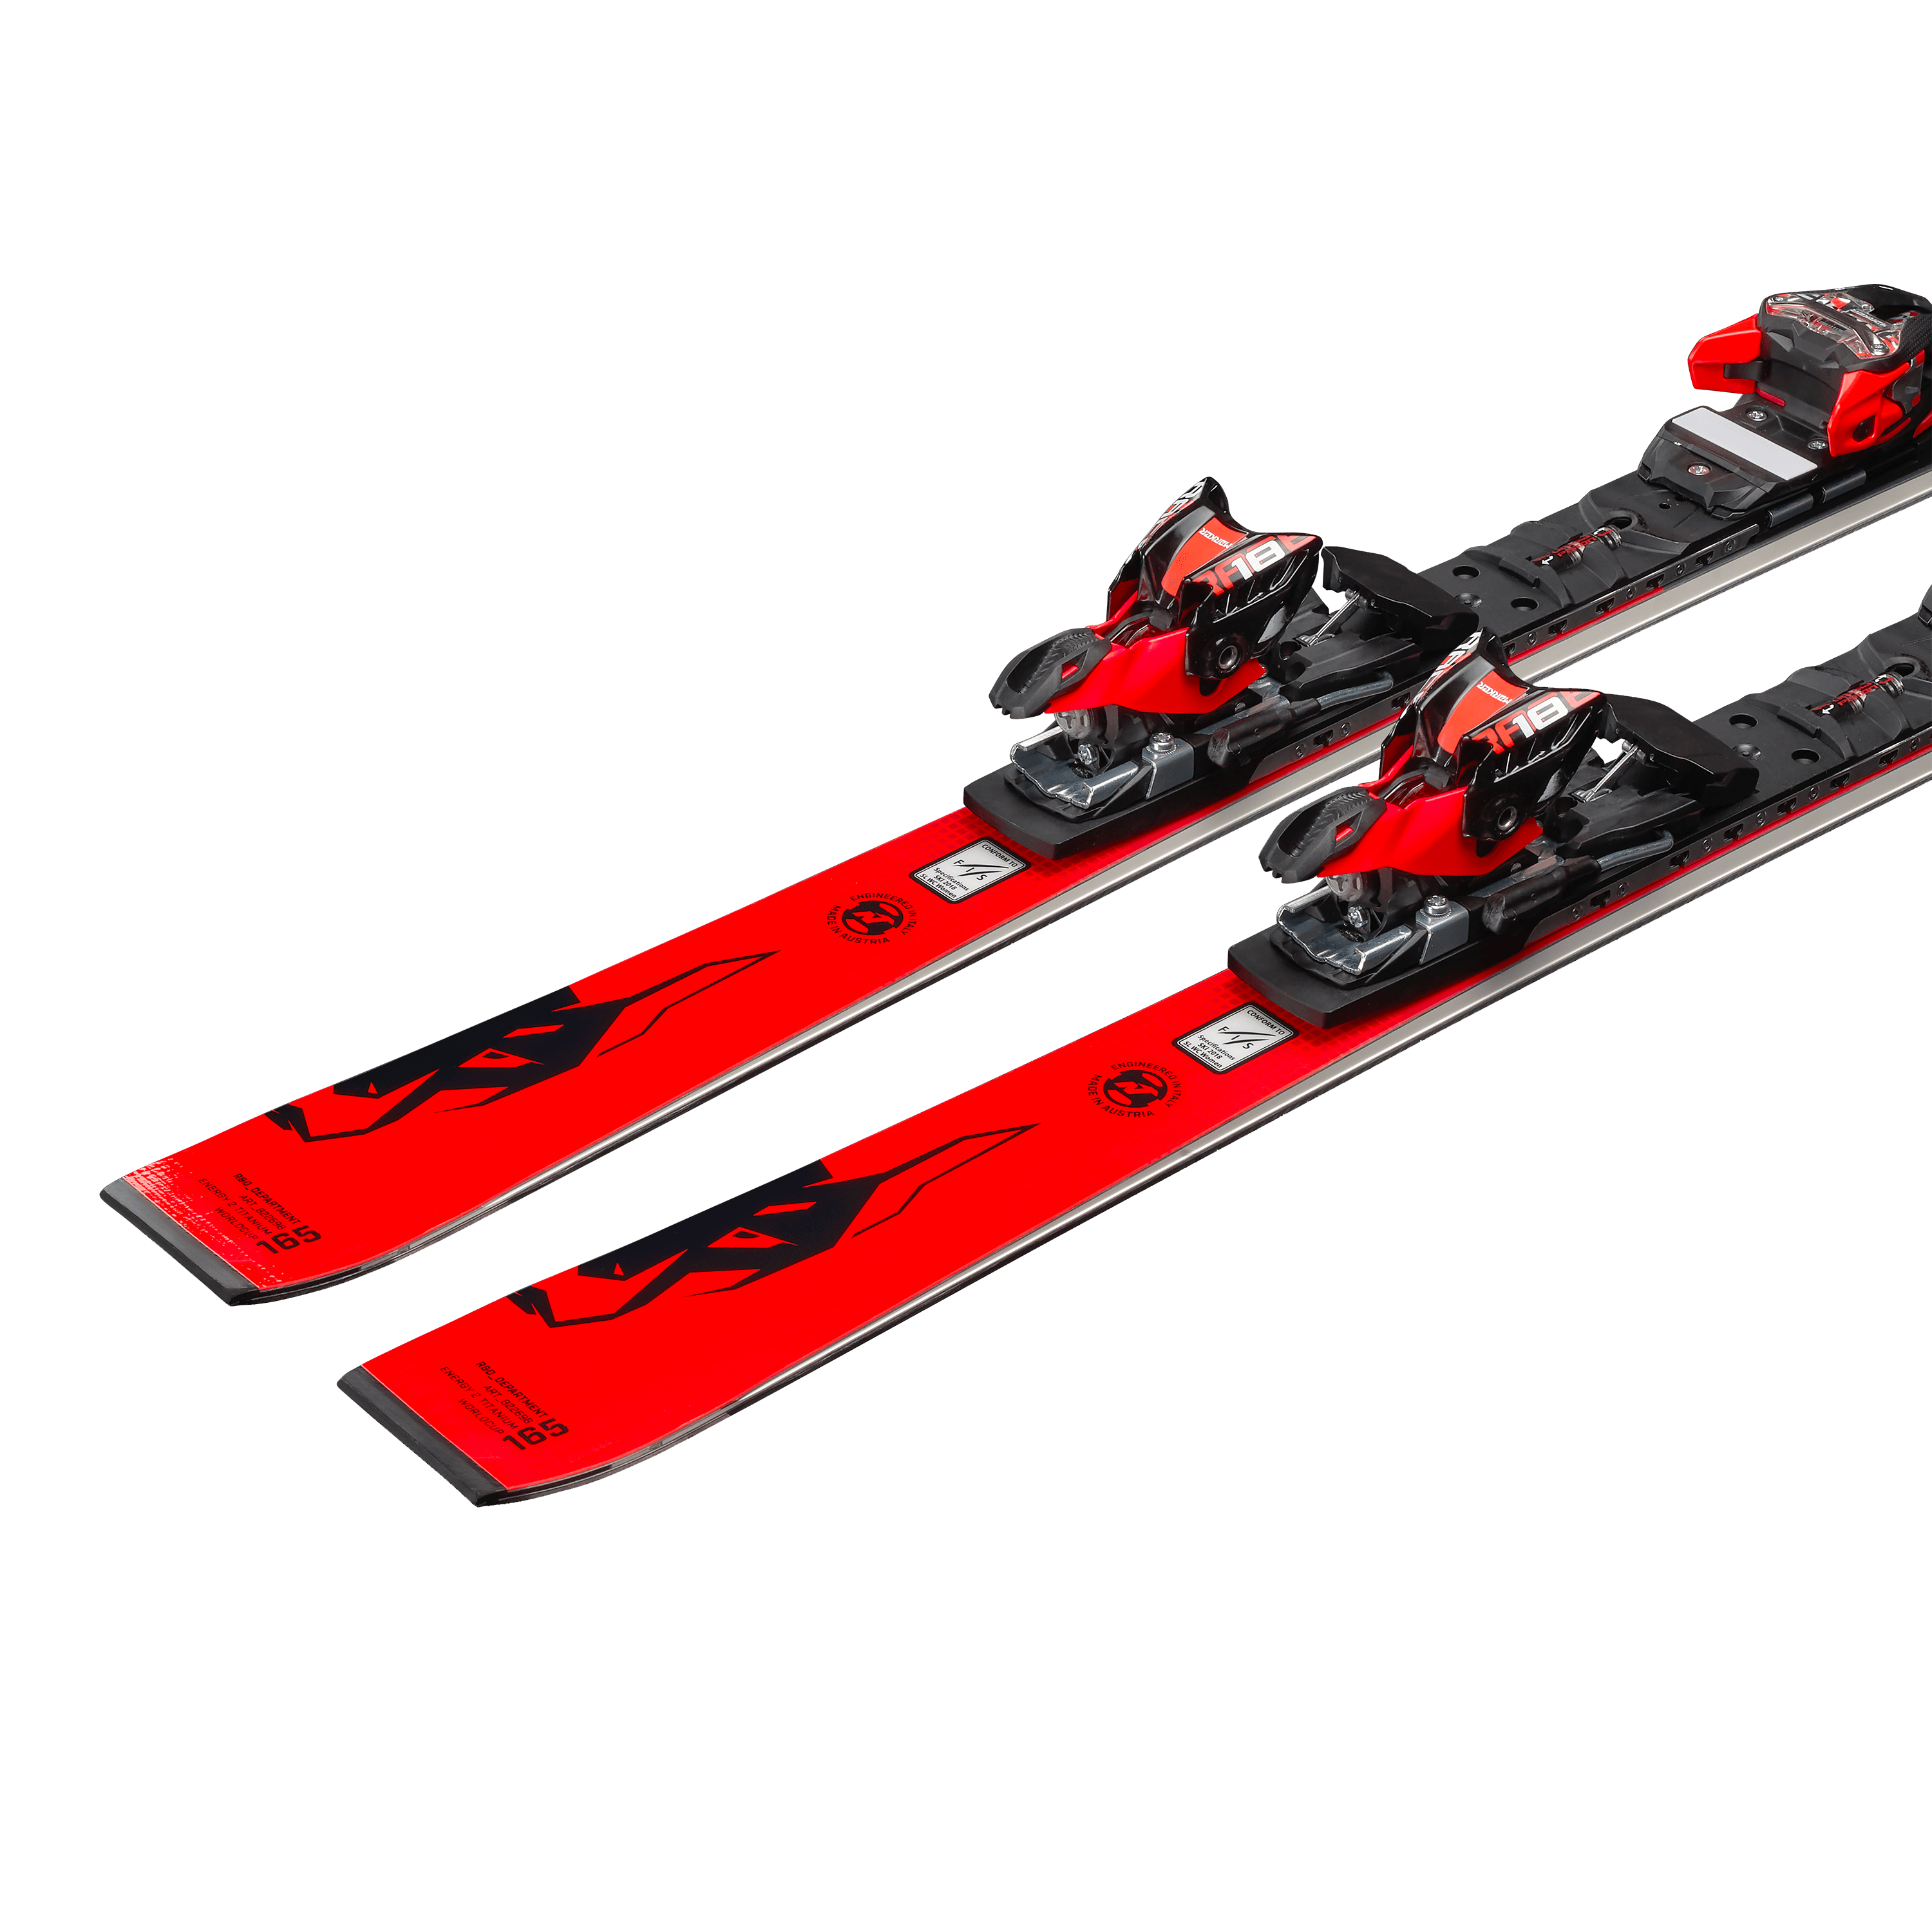 DOBERMANN SL WC PLATE Nordica - Skis and Boots – Official website